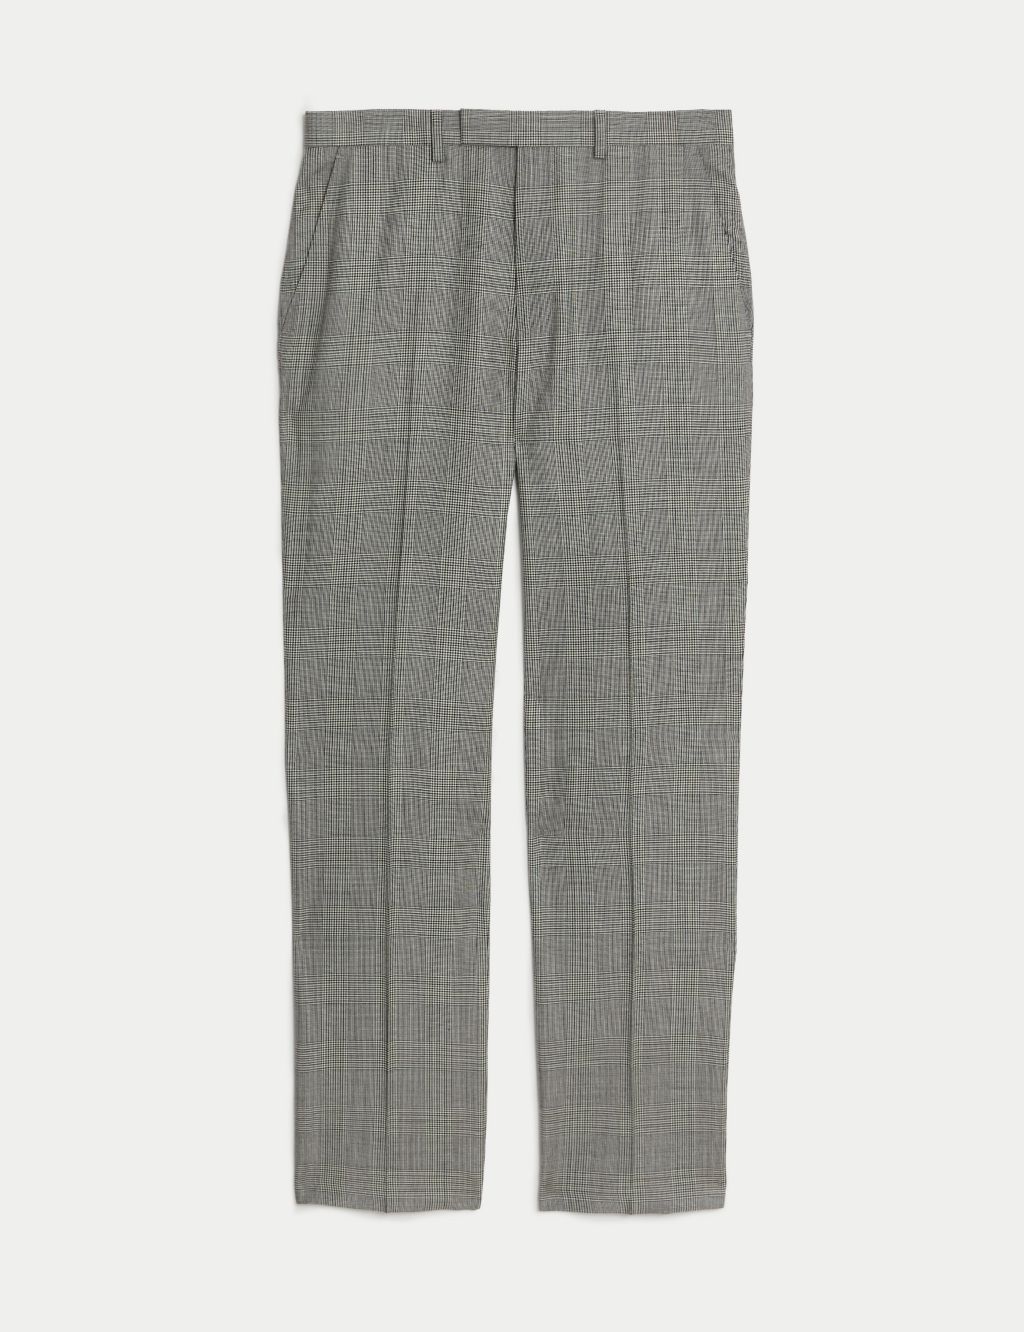 Regular Fit Pure Wool Check Suit Trousers | M&S SARTORIAL | M&S